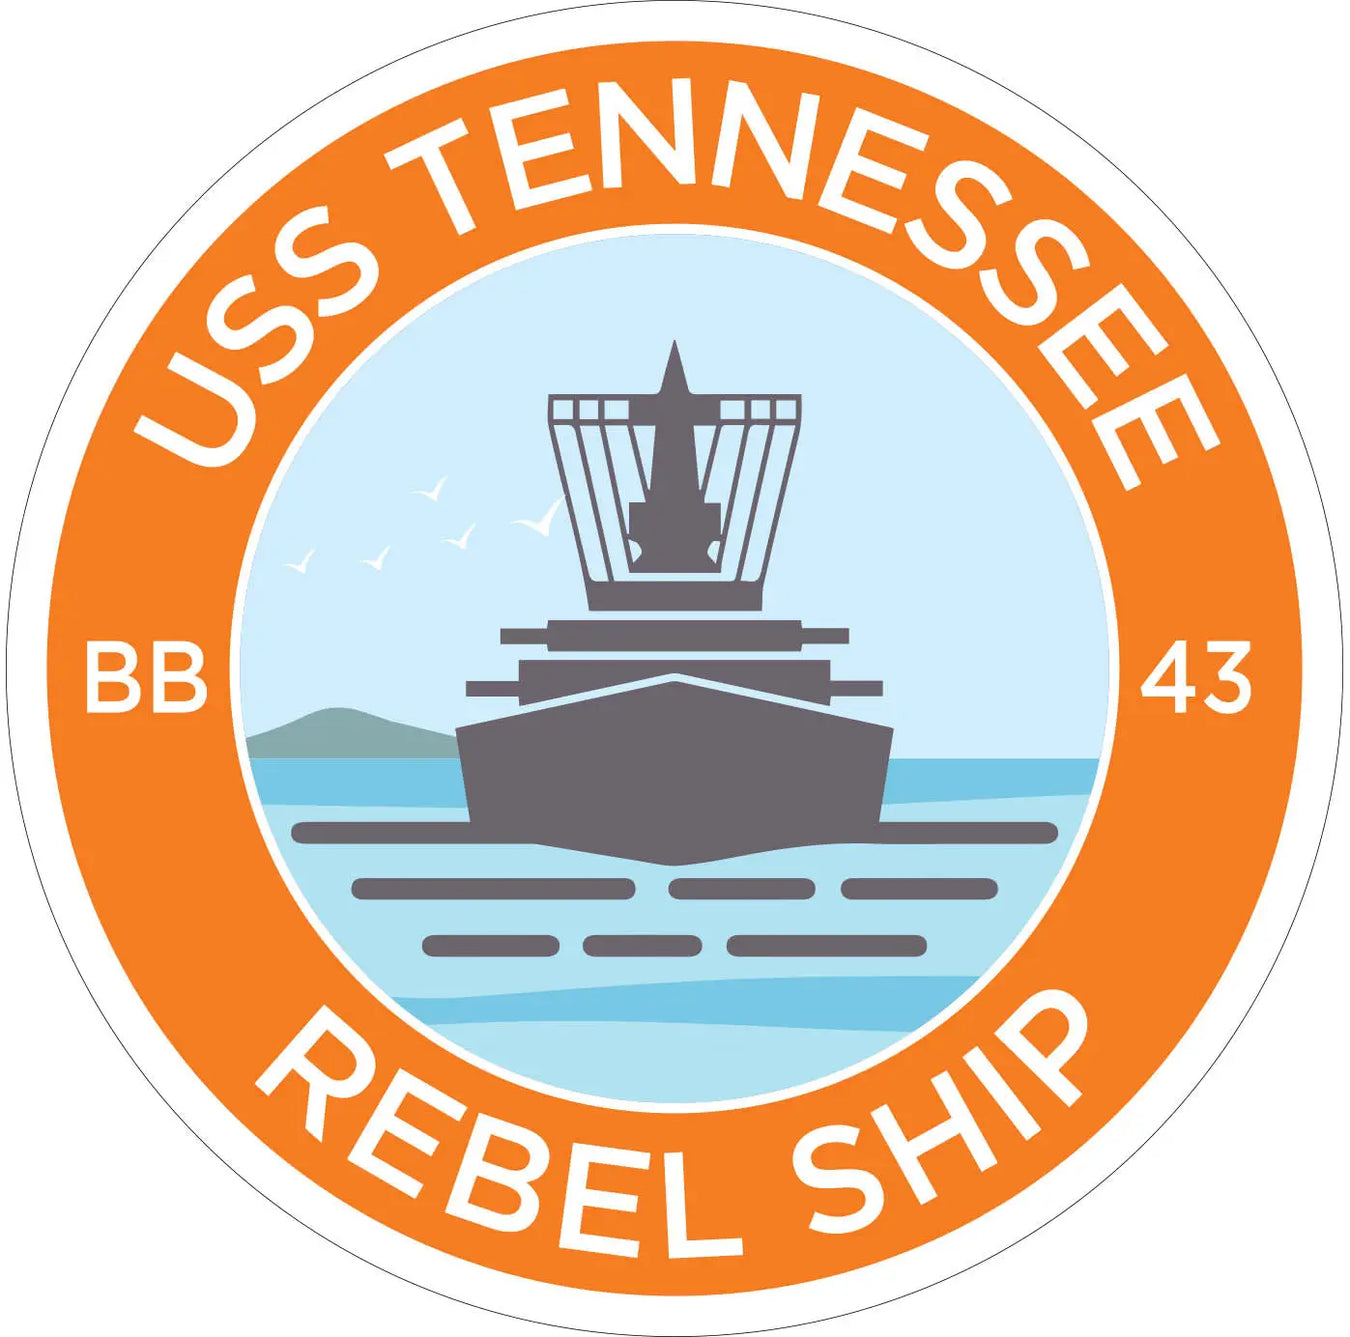 USS Tennessee (BB-43) Merchandise - Shop T-Shirts, hoodies, patches, pins, flags, decals, hats and more.